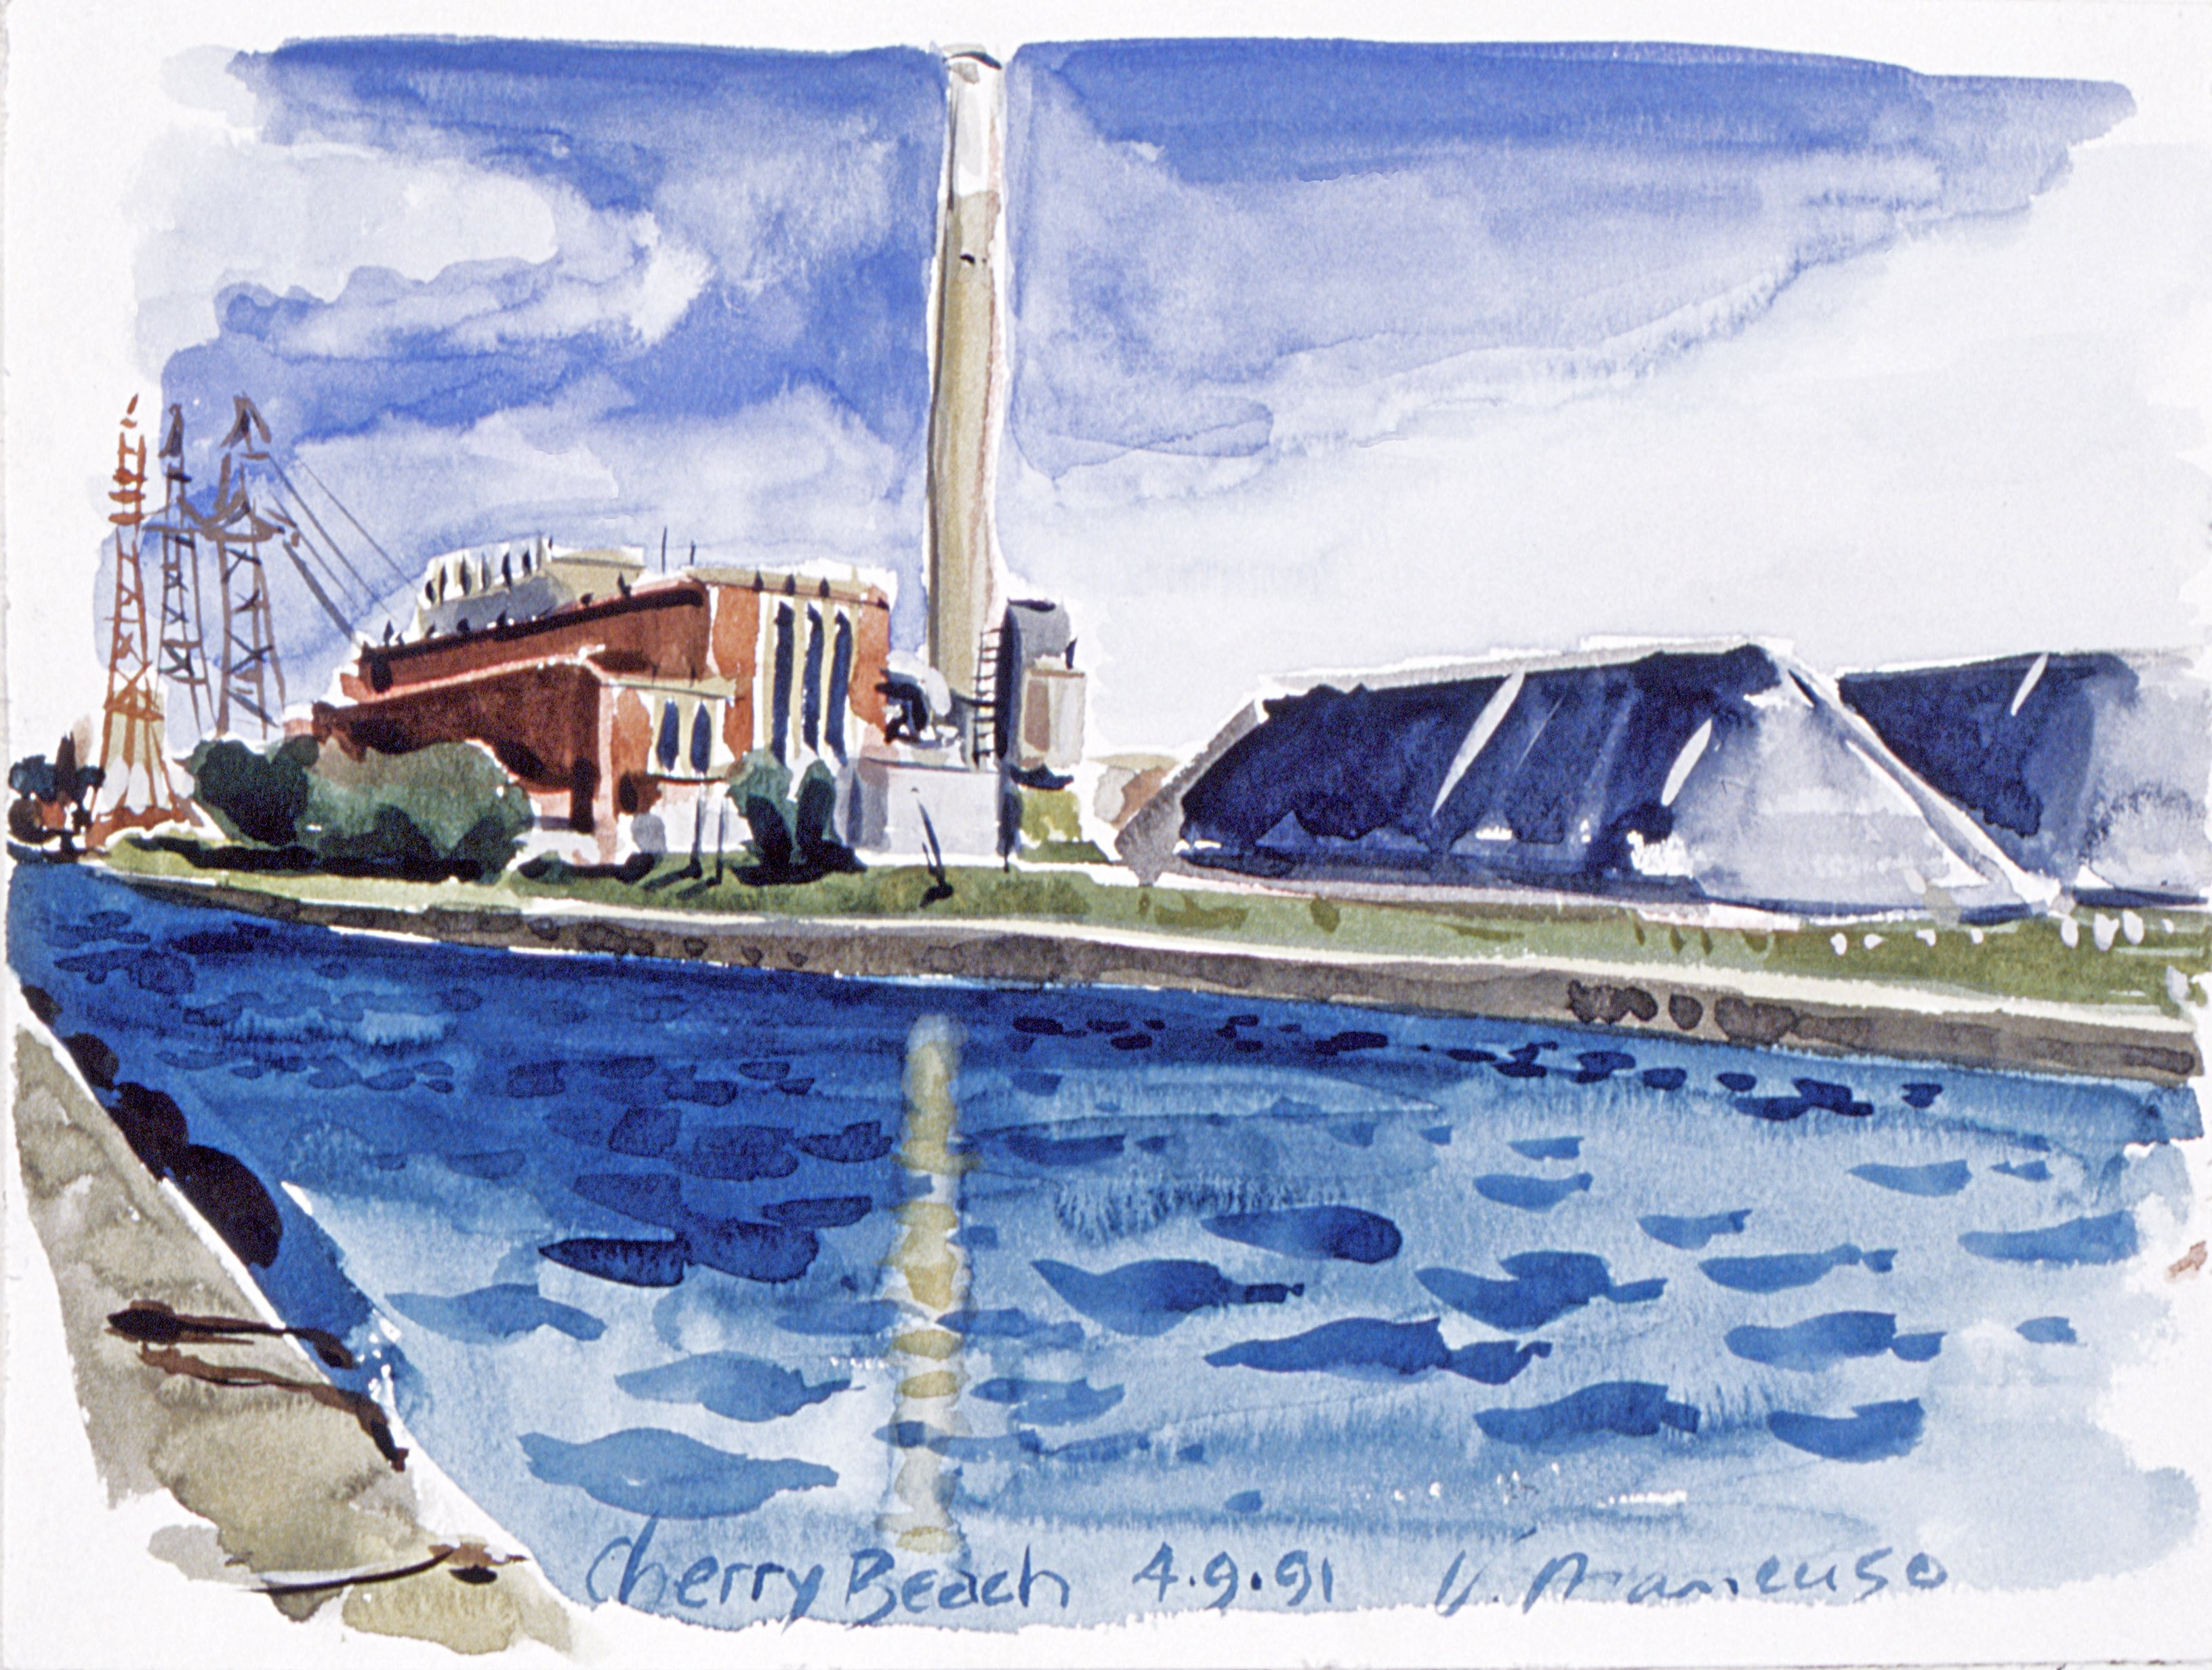 Cherry Beach, Toronto, 9x12 inch water colour is part of the permanent collection of the Toronto Historical Board, Marine Museum. 